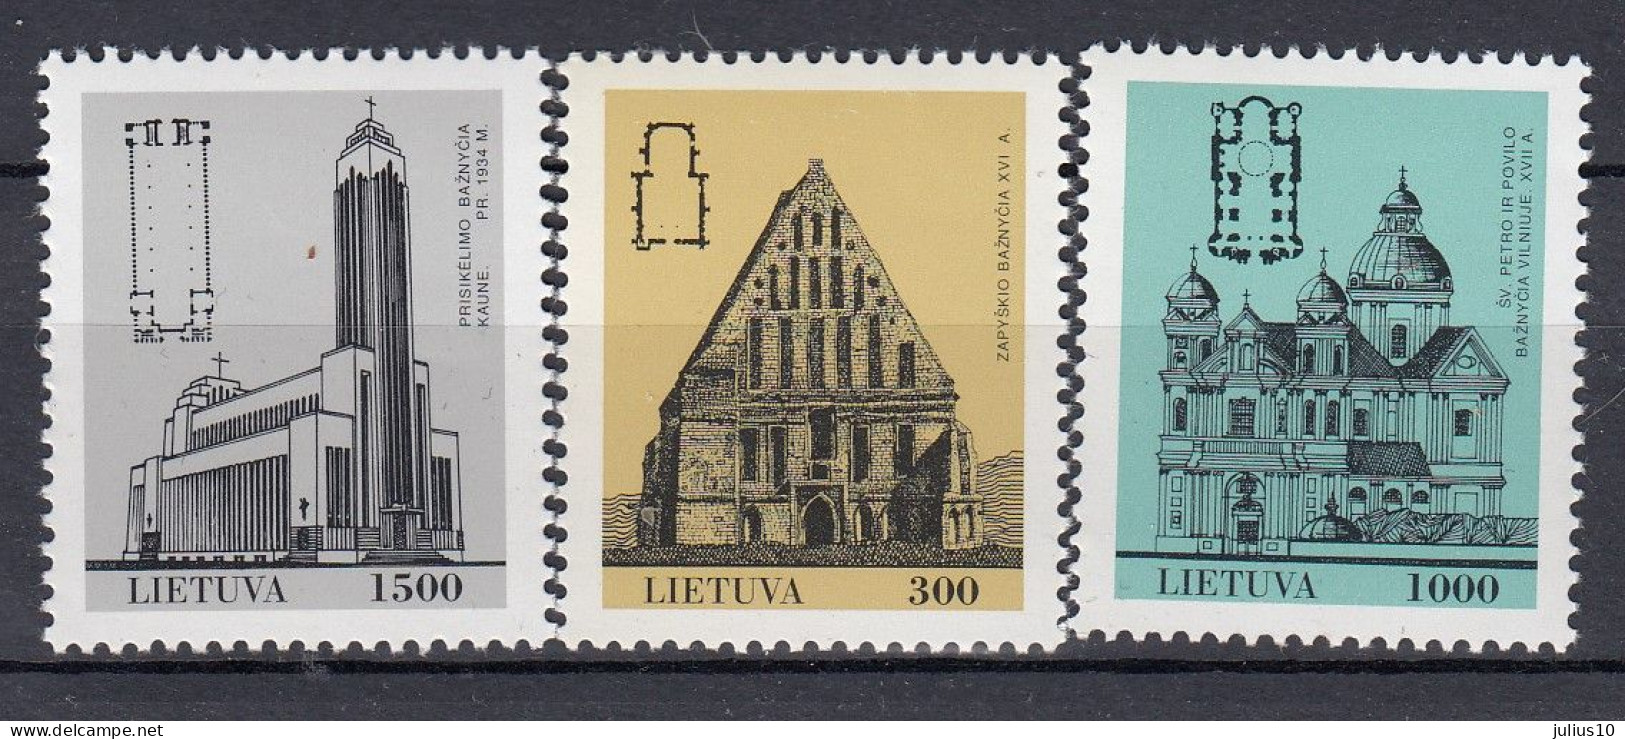 LITHUANIA 1993 Architecture Churches MNH(**) Mi 511-513 #Lt1177 - Churches & Cathedrals